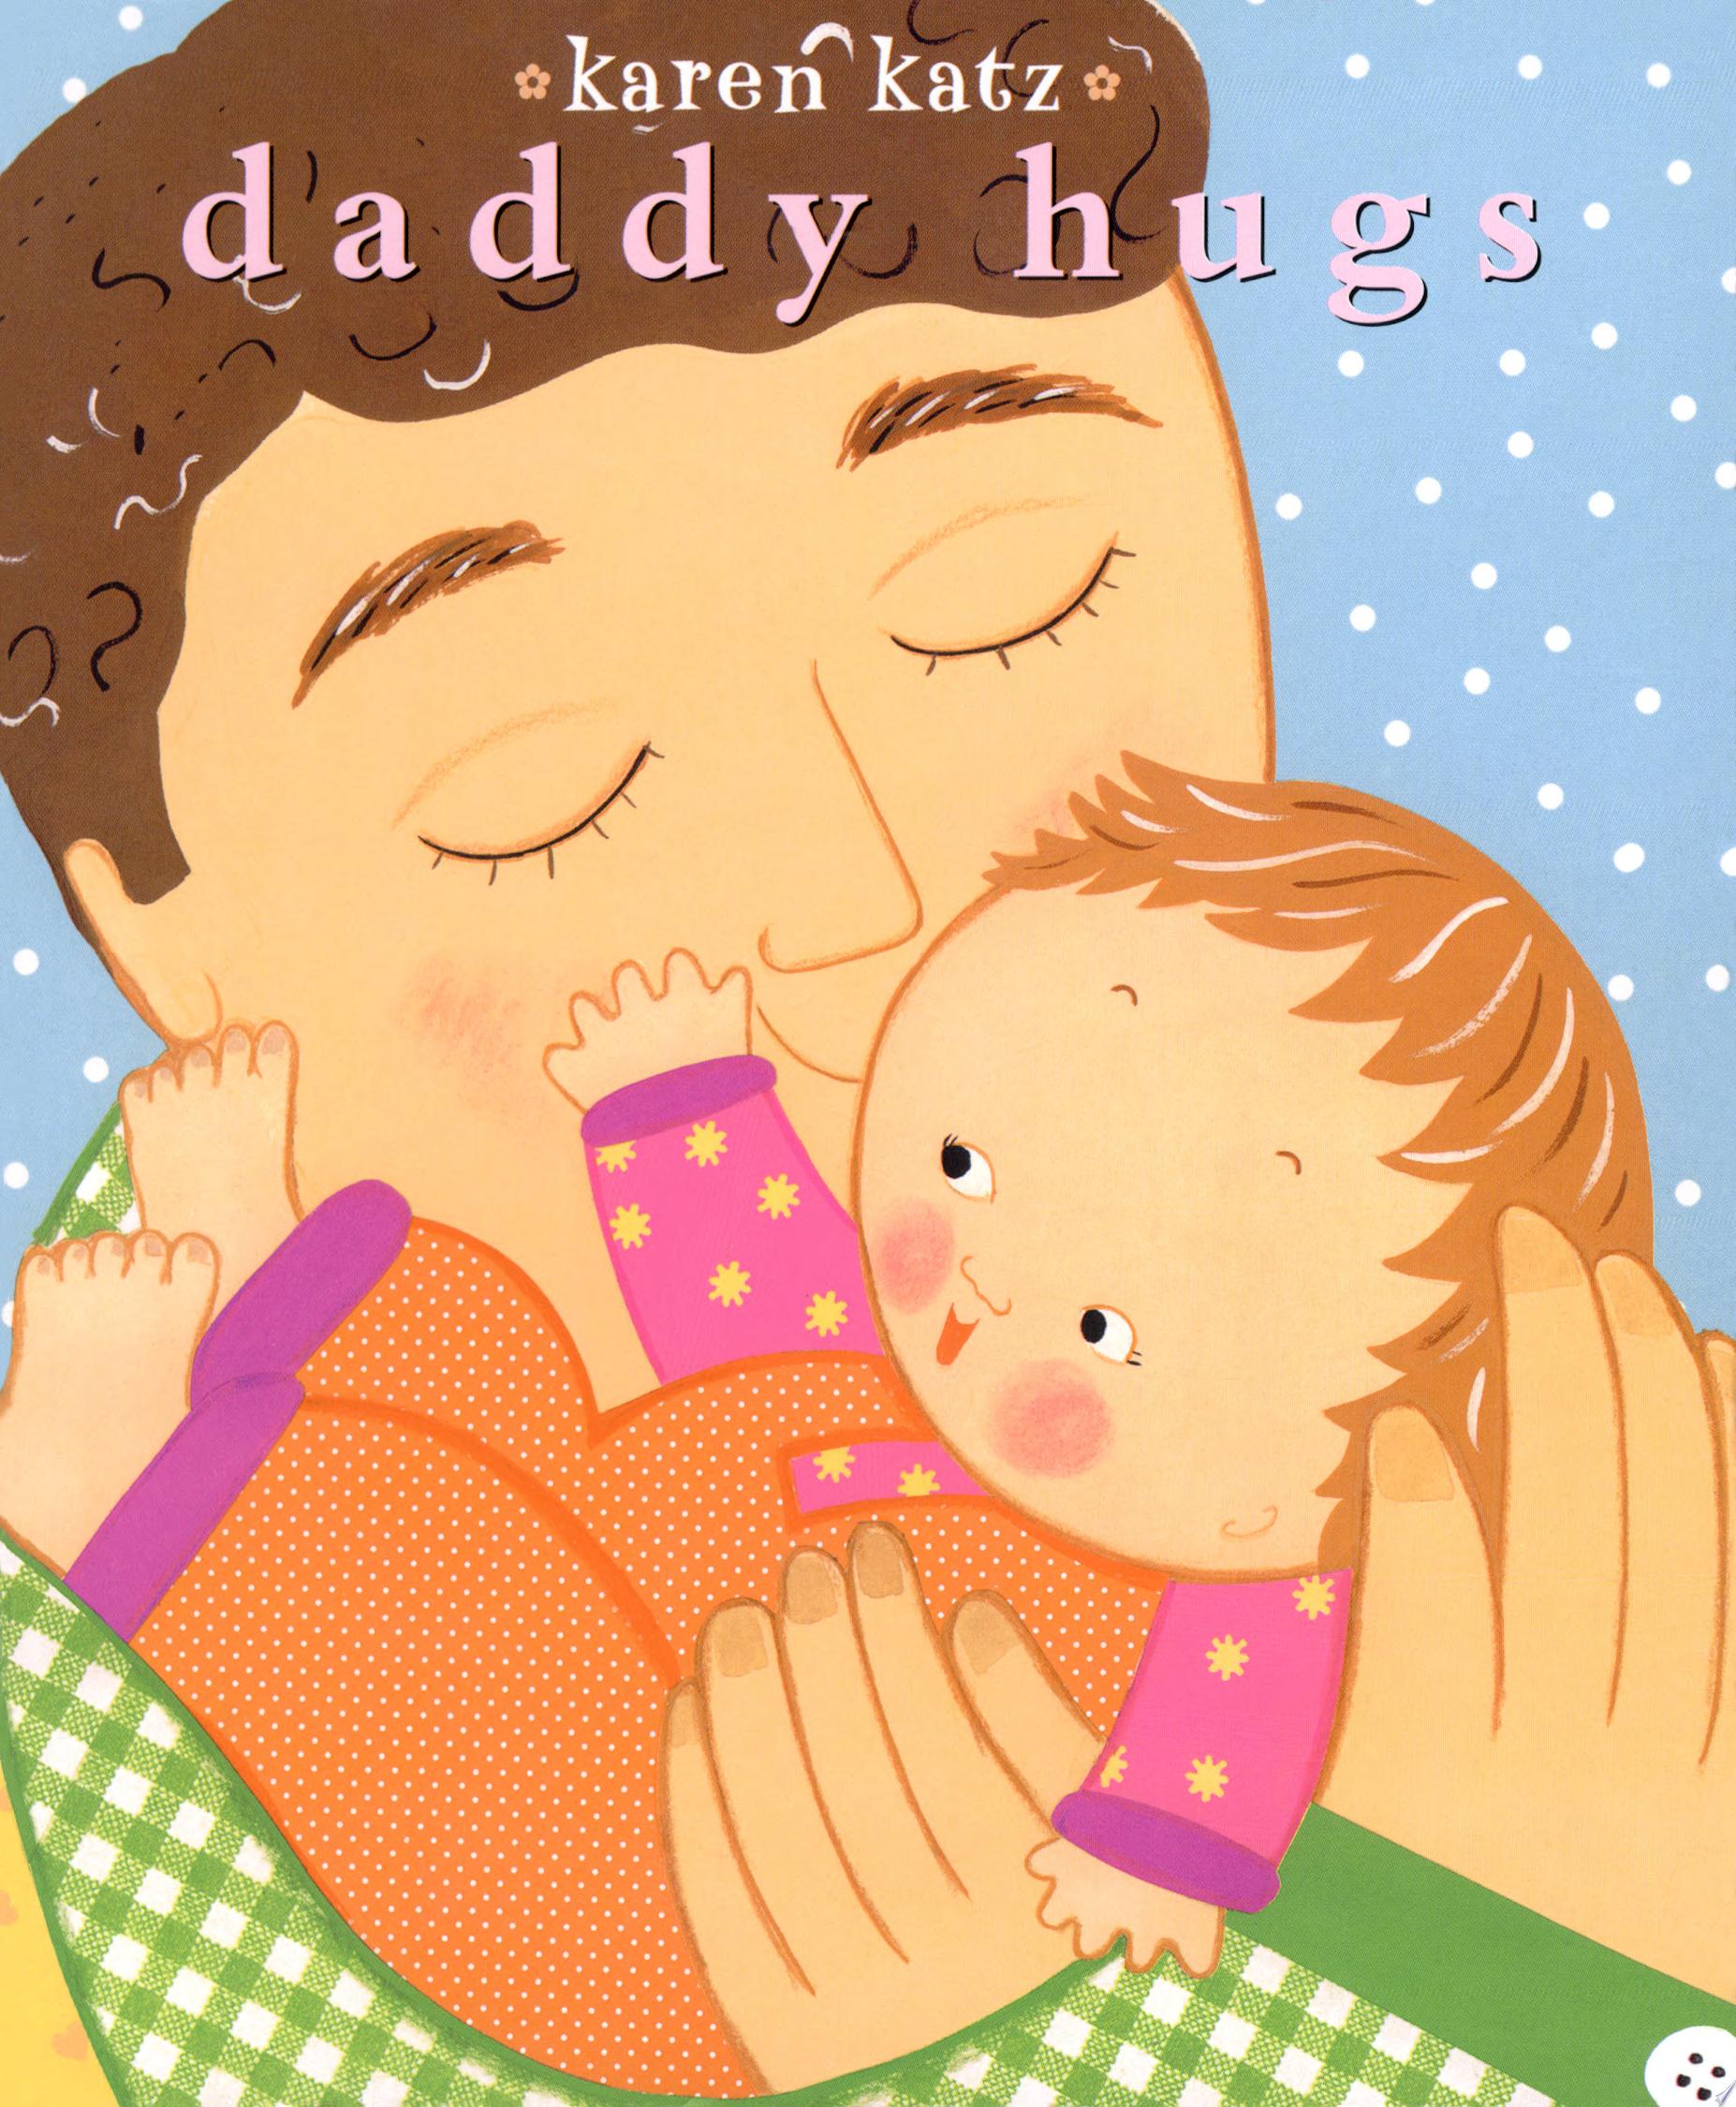 Image for "Daddy Hugs"